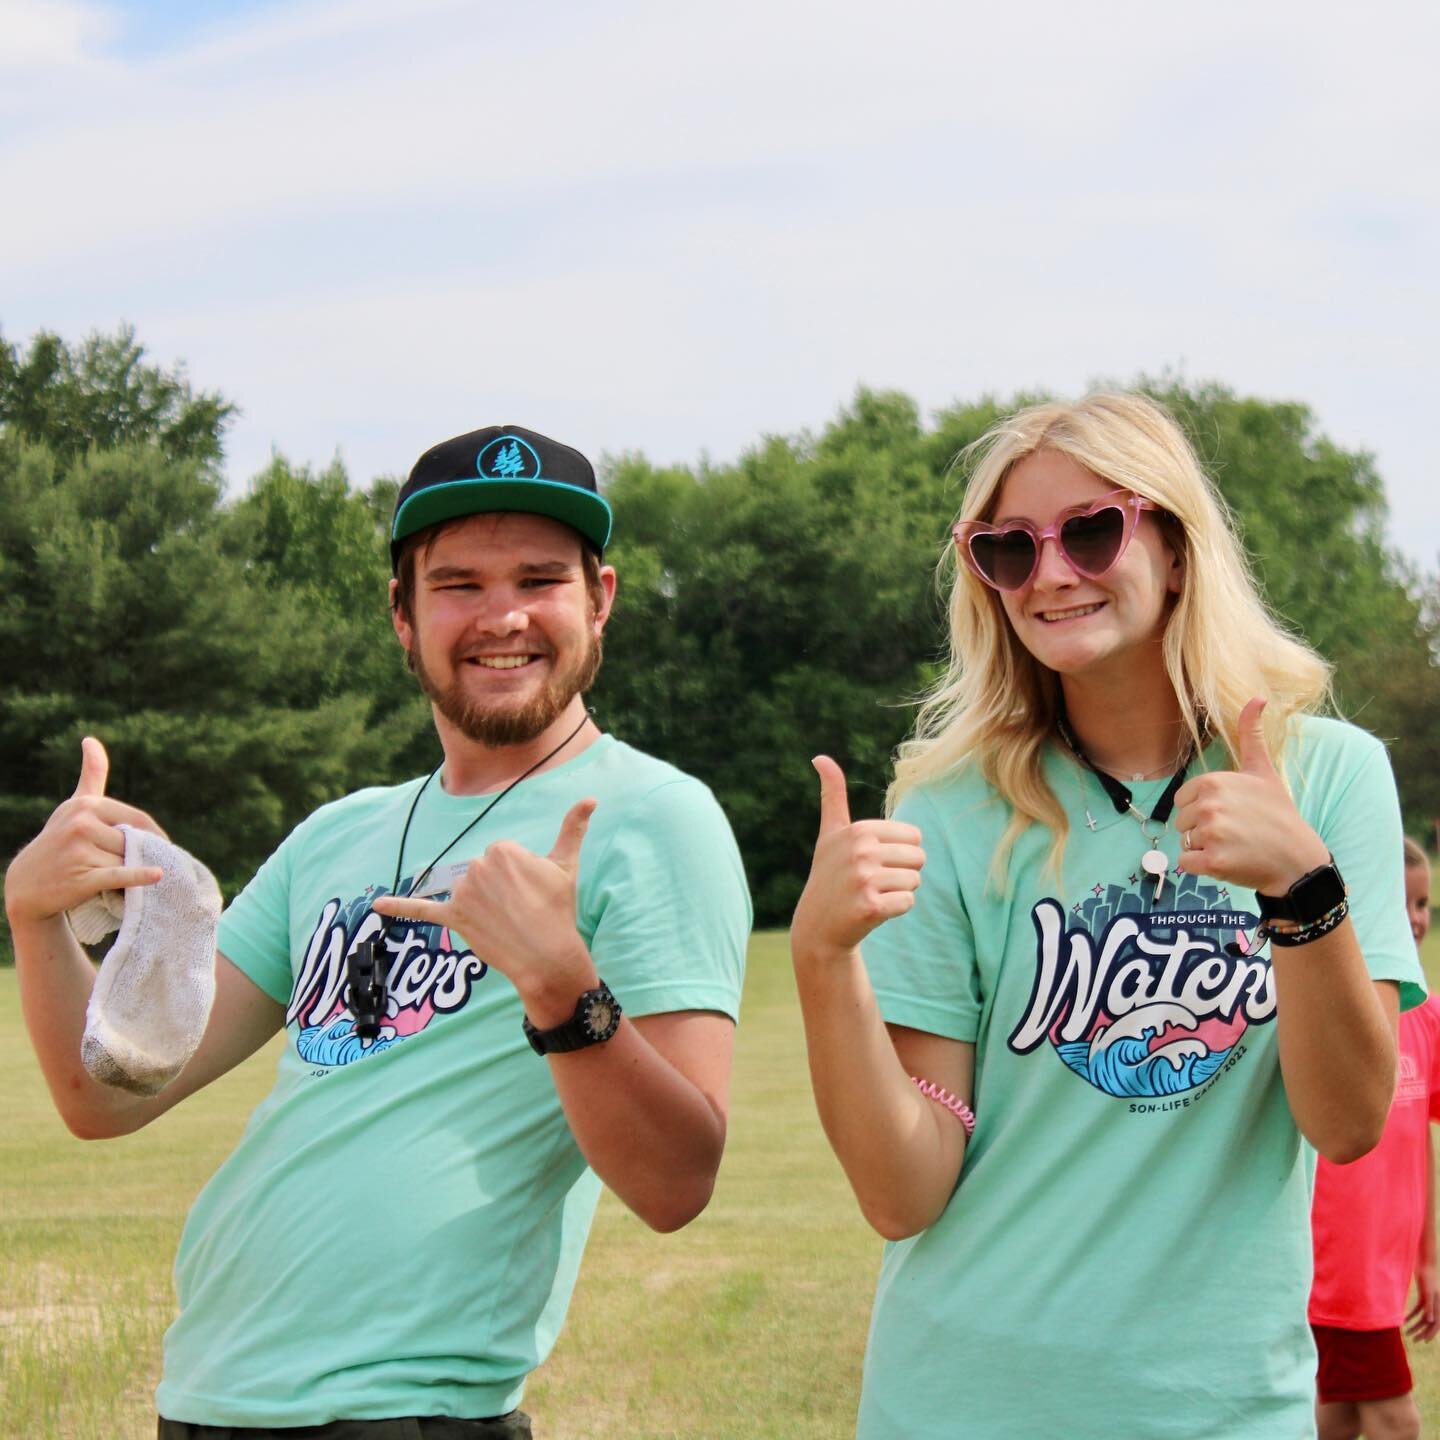 Week One pics and Videos are available on Facebook! Counselor Stephen and Counselor Emily are super excited about it! #ThroughTheWaters #PicturesOnline #ThumbsUp